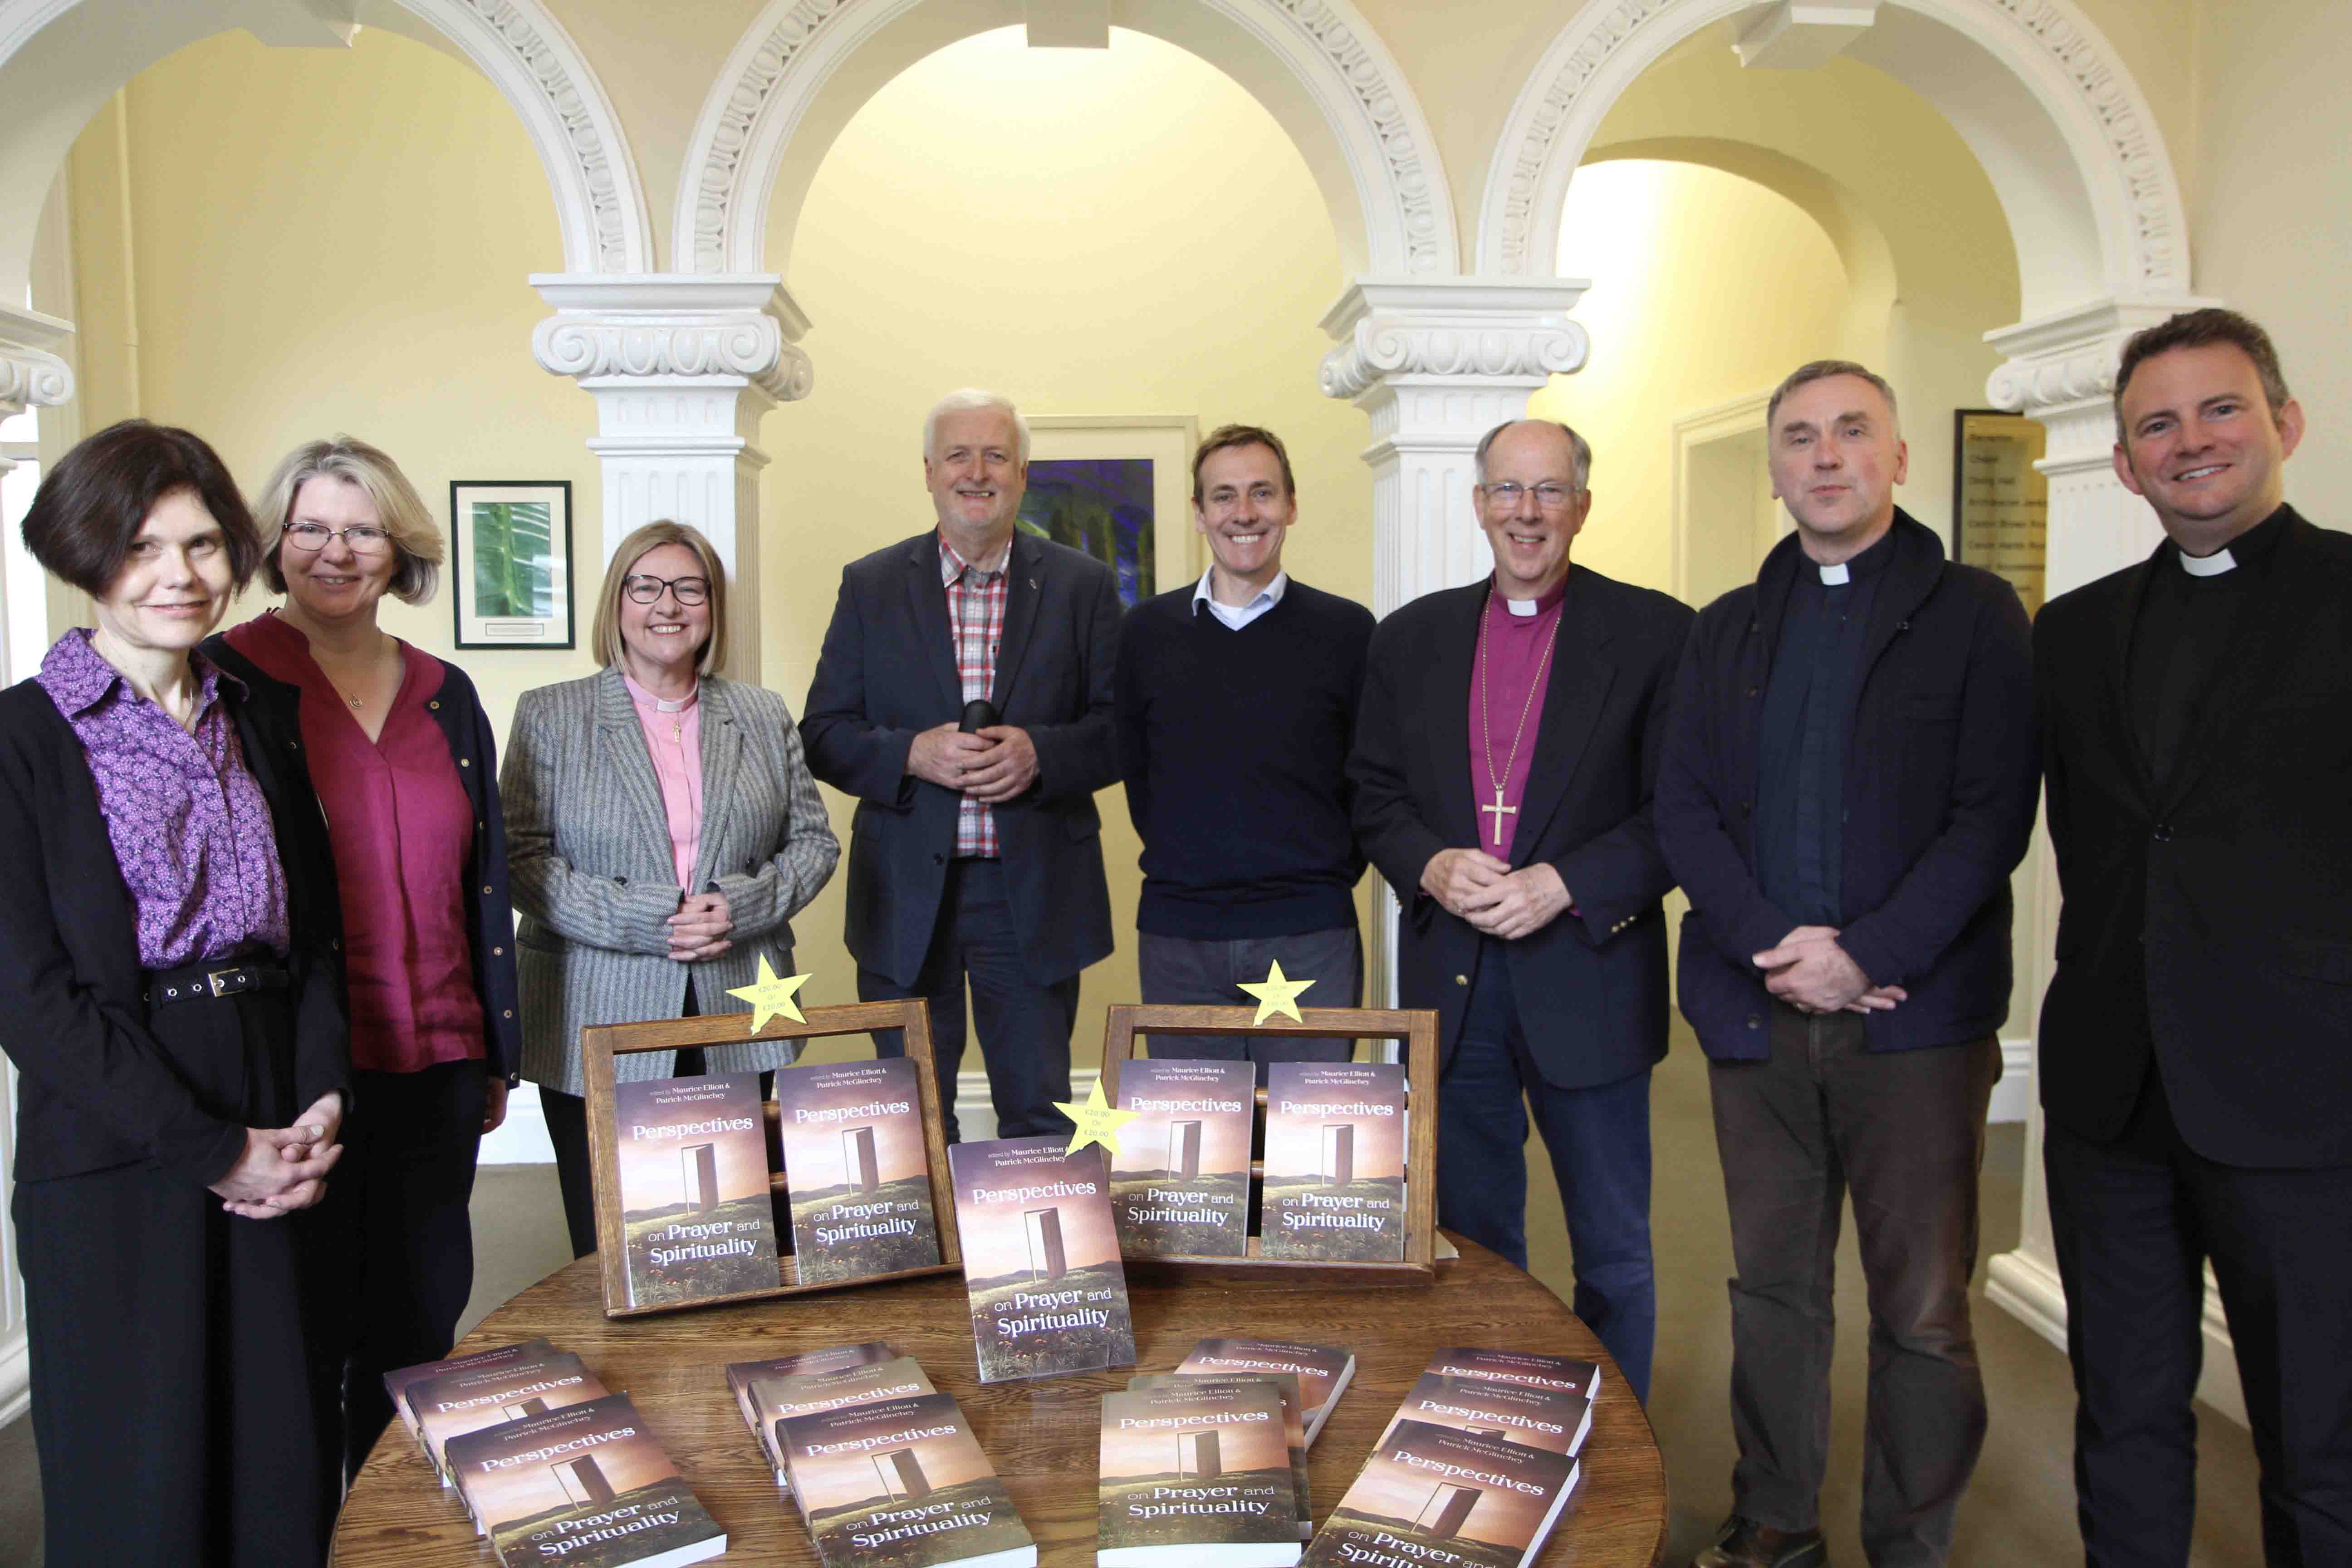 Contributors Dr Bridget Nichols, the Revd Dr Janet Unsworth, the Revd Suzanne Cousins, Fr Kieran O'Mahony OSA, the Revd Dr William Olhausen, the Rt Revd Kenneth Good, the Revd Rob Clements and the Revd Ian Mills.